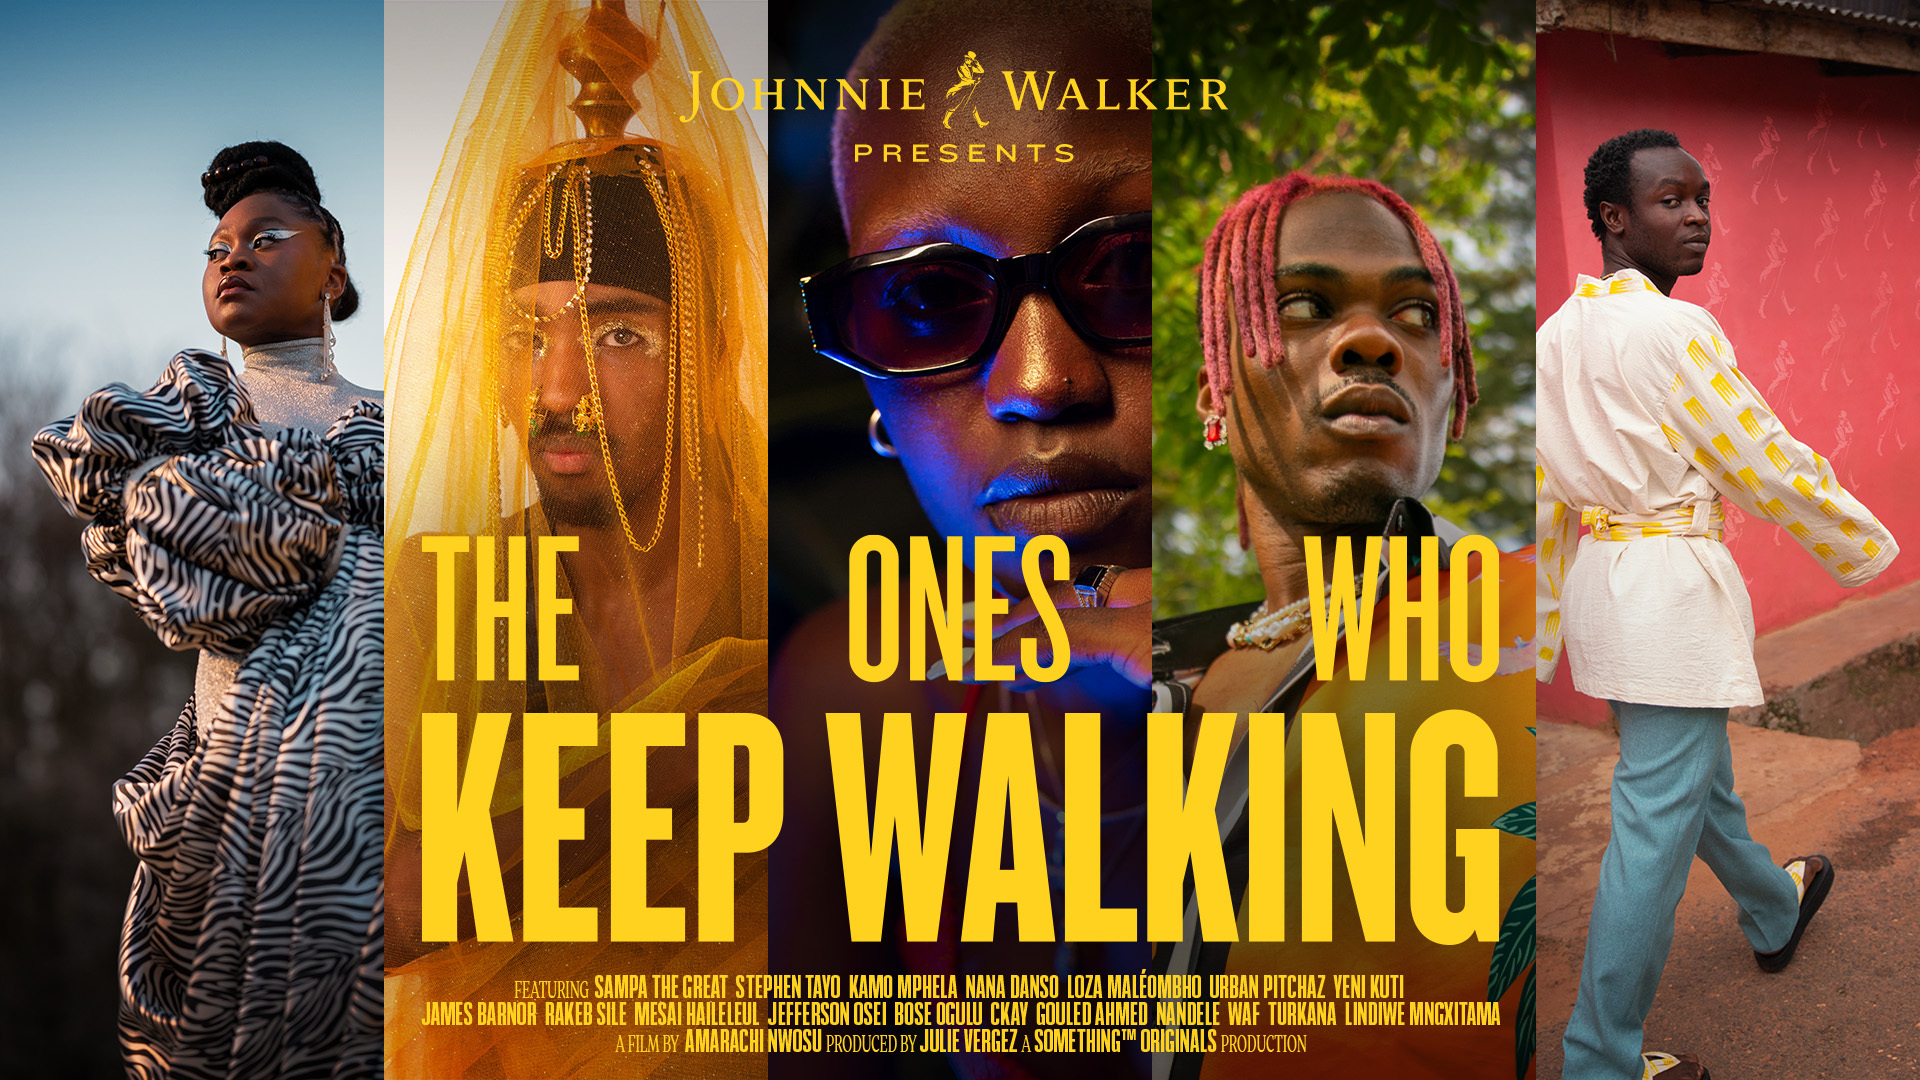 Amarachi Nwosu’s ‘The Ones Who Keep Walking’ tells the story of Art, Music and Culture in Africa right now.